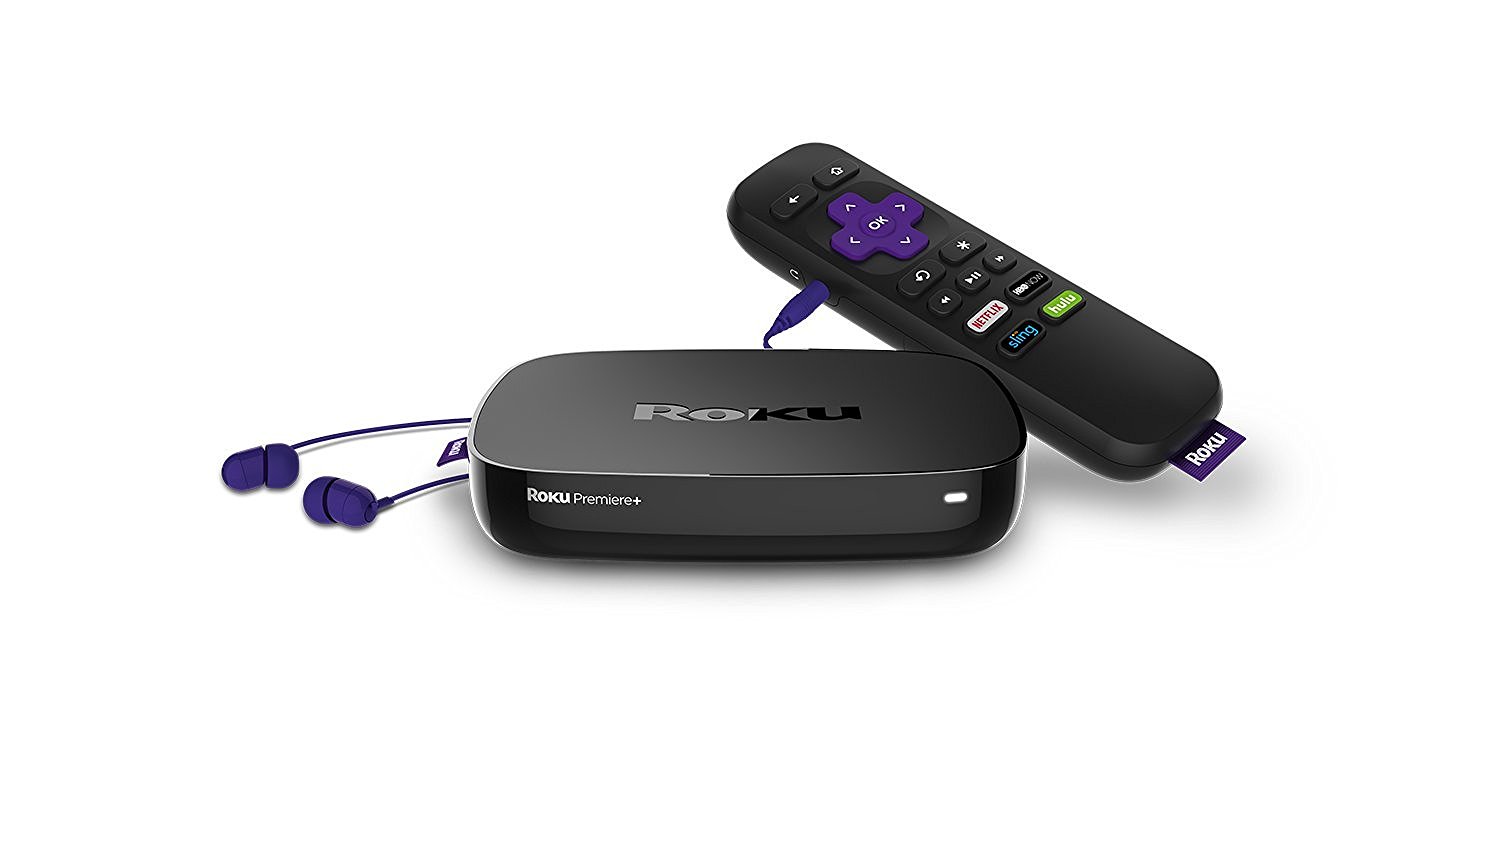 If you want to stream Ultra HD content, don't look any further than this deal on a [refurbished Roku Premiere+](https://www.amazon.com/dp/B06XS33WDQ?tag=toolstoysdeals-20).